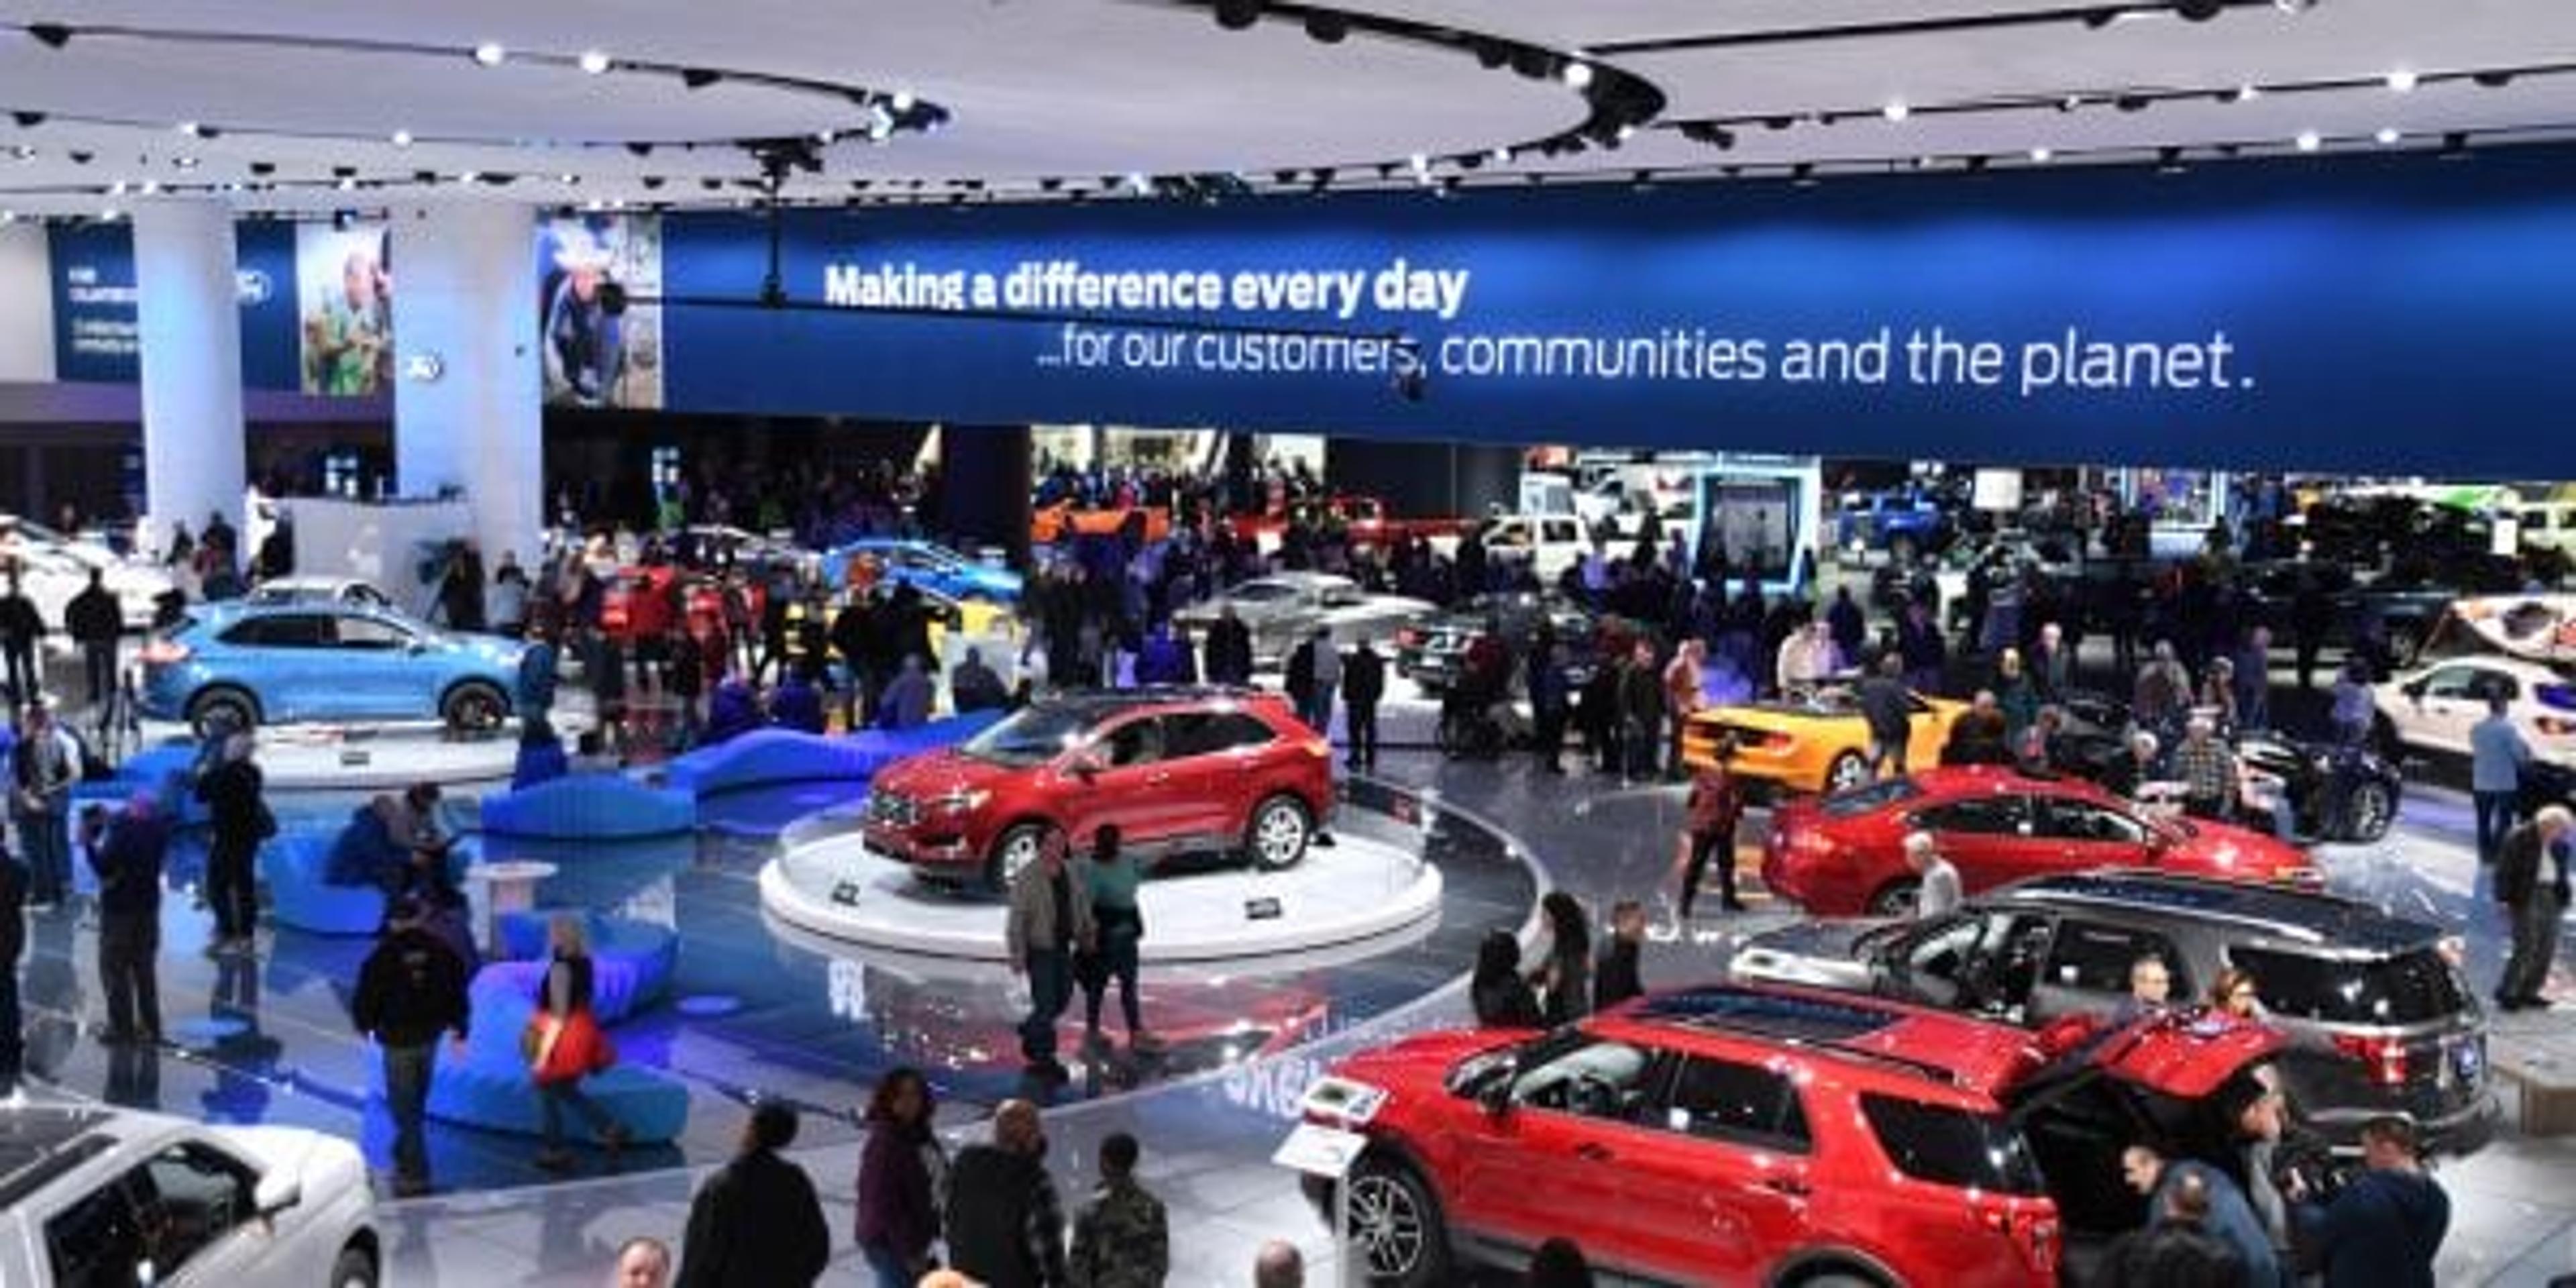 Floor dislplay for Ford Motors at the North American International Auto Show in Detroit